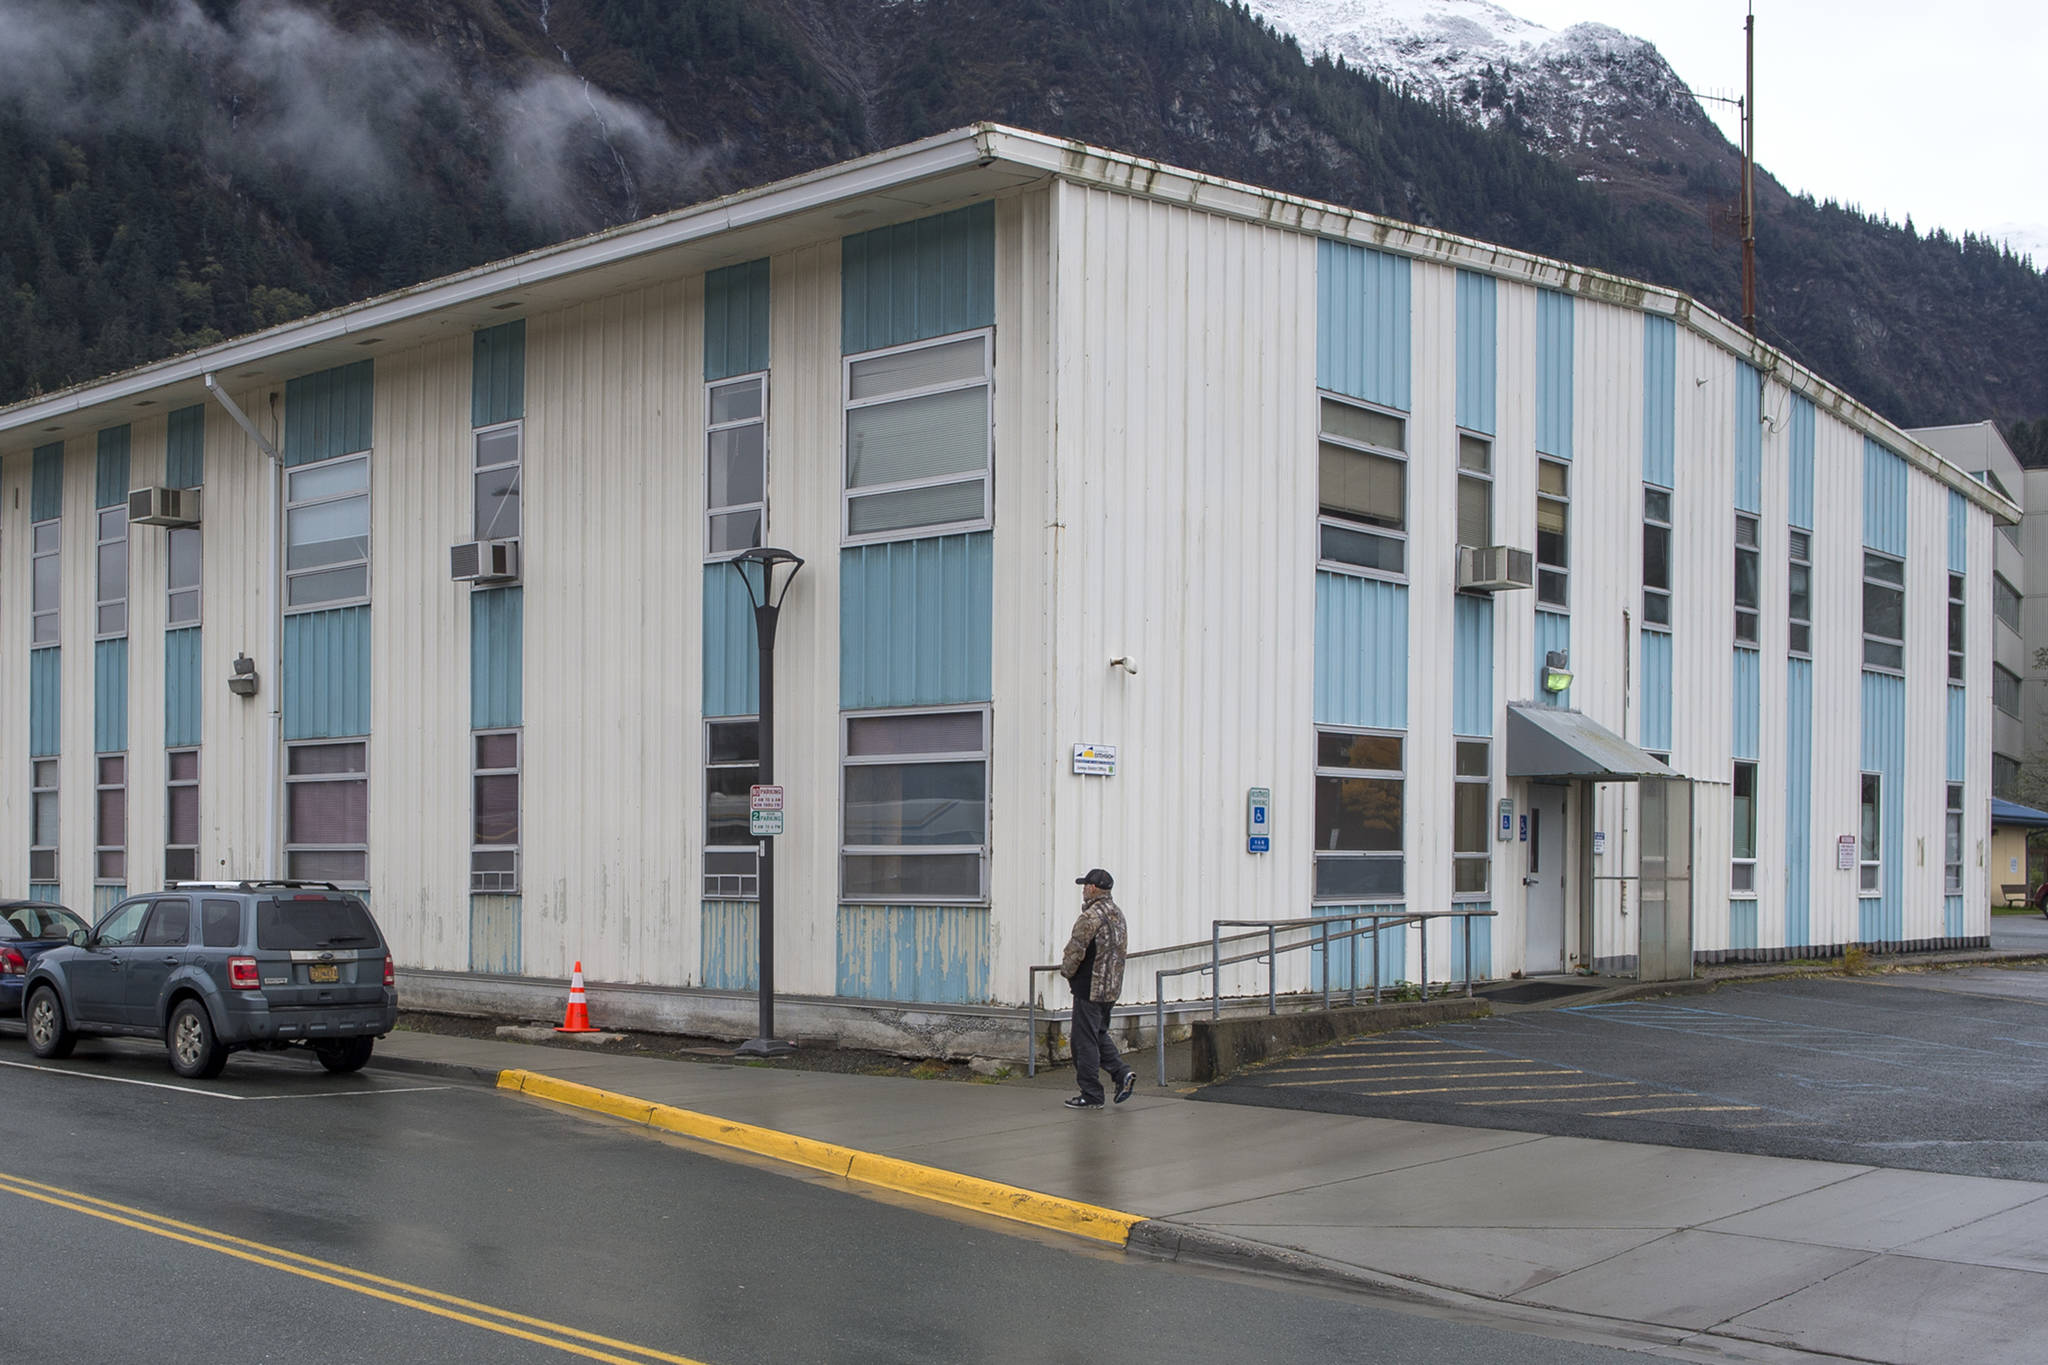 The former Public Safety Building on Whittier Street serves as an overnight shelter in the winter. (Michael Penn | Juneau Empire File)